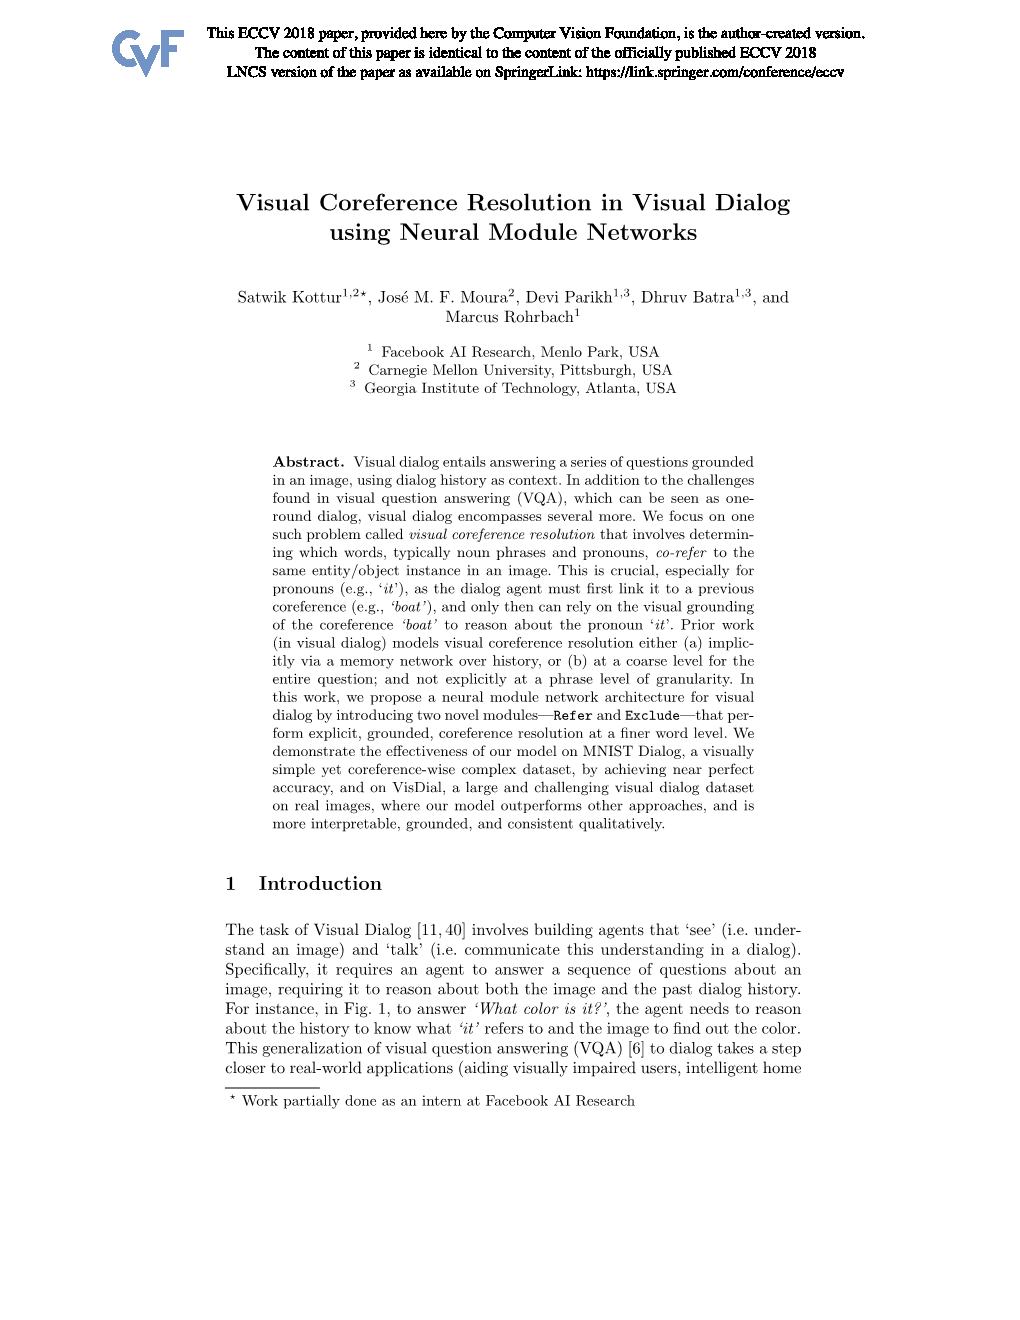 Visual Coreference Resolution in Visual Dialog Using Neural Module Networks